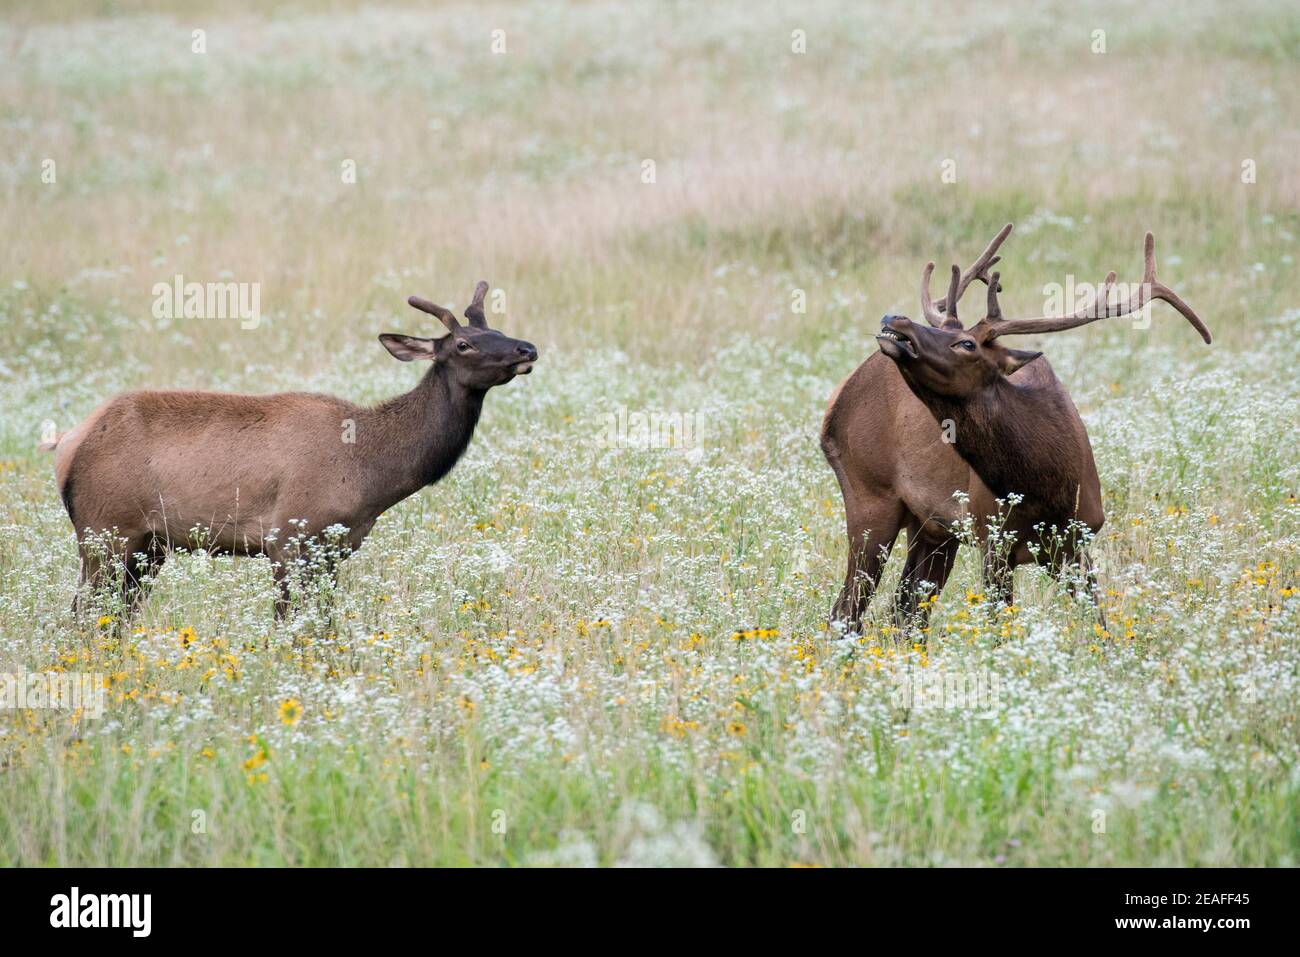 Two elk, or wapiti (Cervus canadensis) in the Great Smoky Mountains National Park Stock Photo